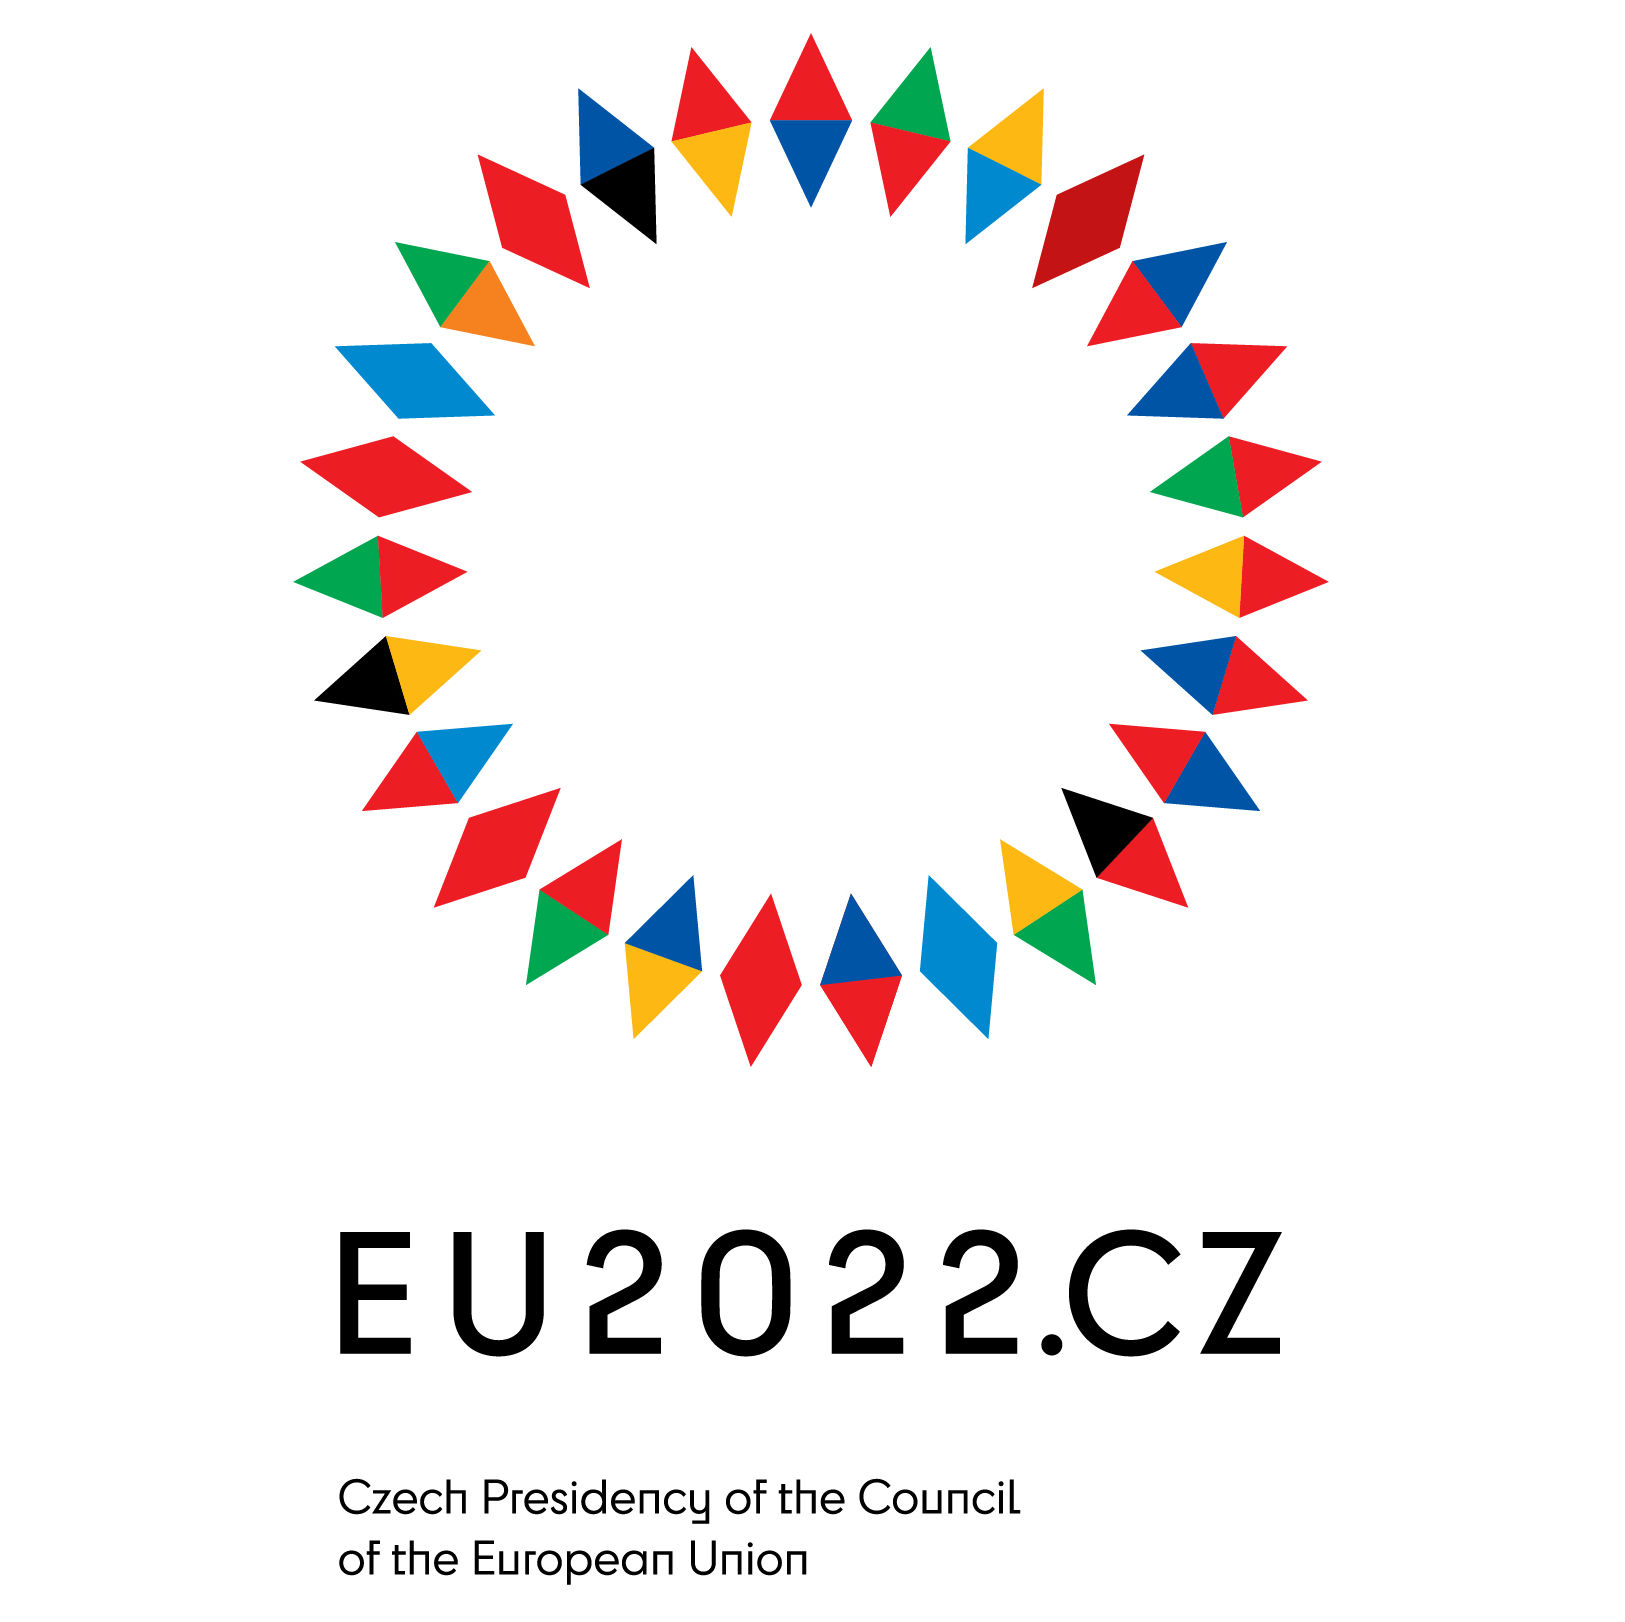 Czech Presidency of the Council of the European Union